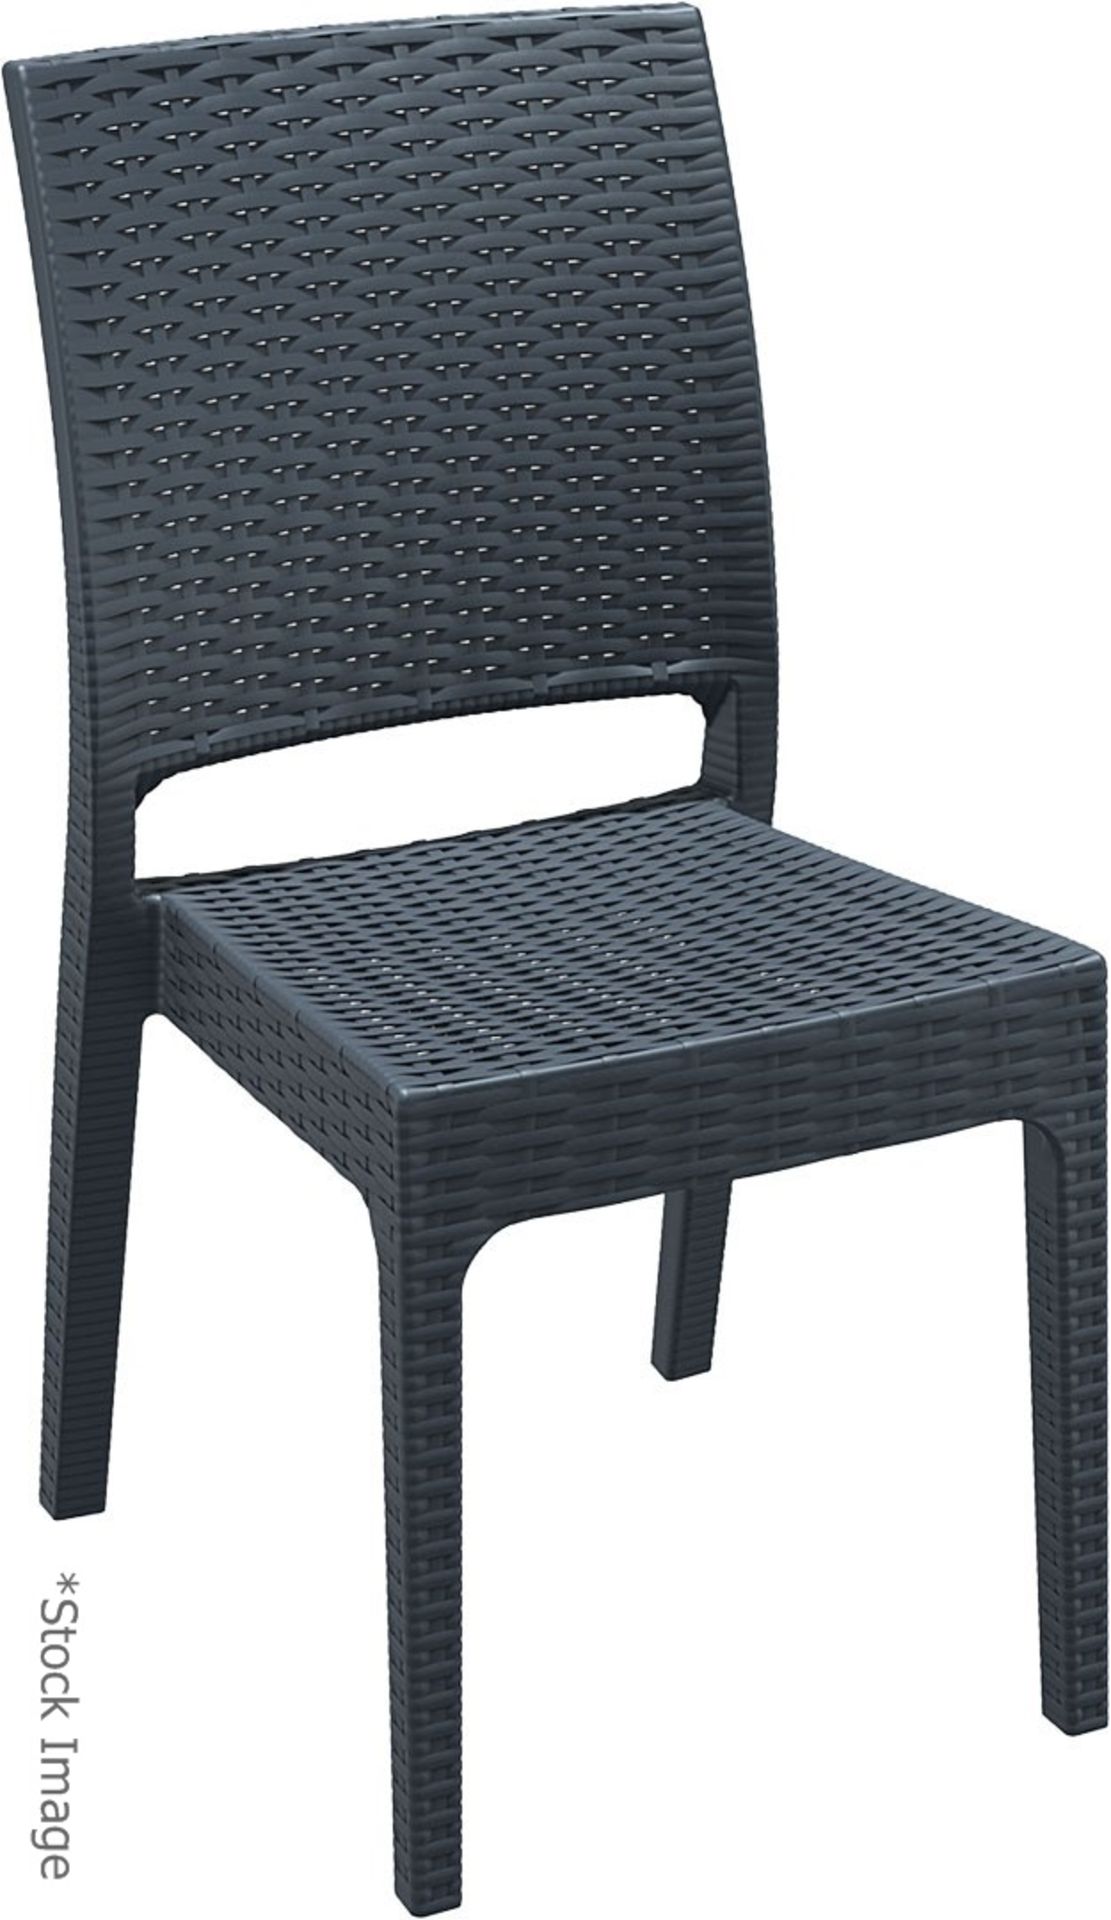 8 x SIESTA EXCLUSIVE 'Florida' Commercial Stackable Rattan-style Chairs In Dark Grey - CL987 - - Image 7 of 13